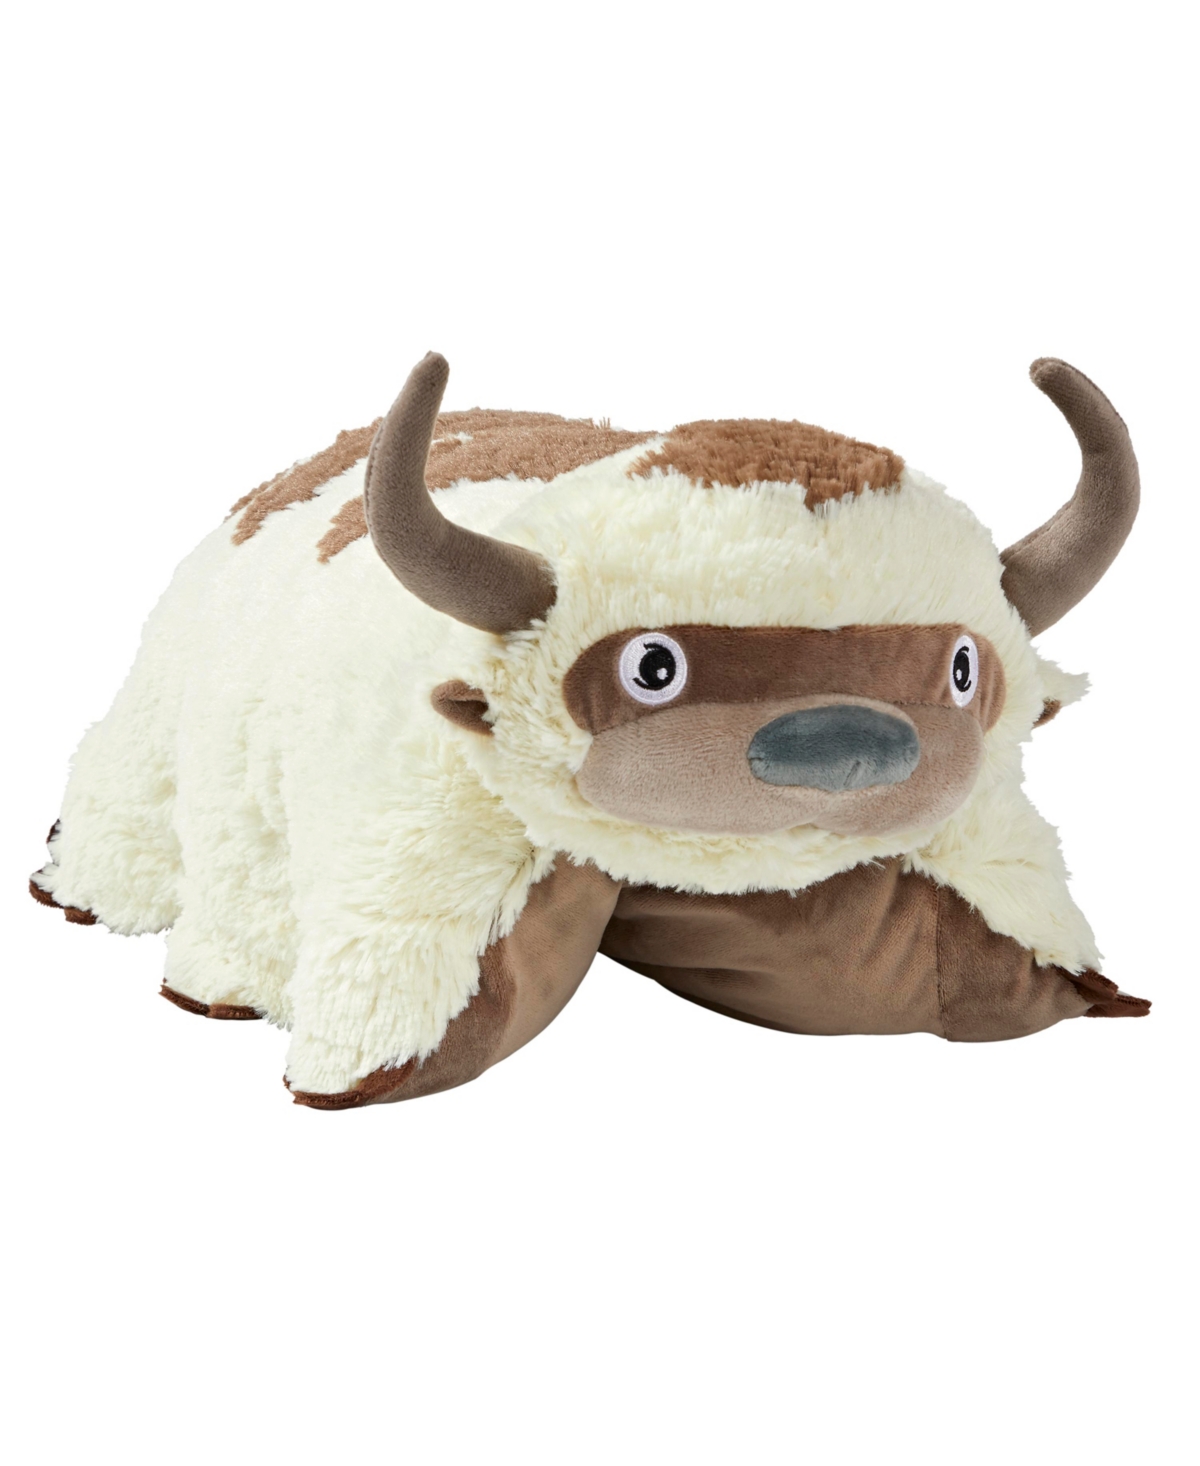 Pillow Pets Appa From Avatar The Last Airbender Plush Toy In Cream